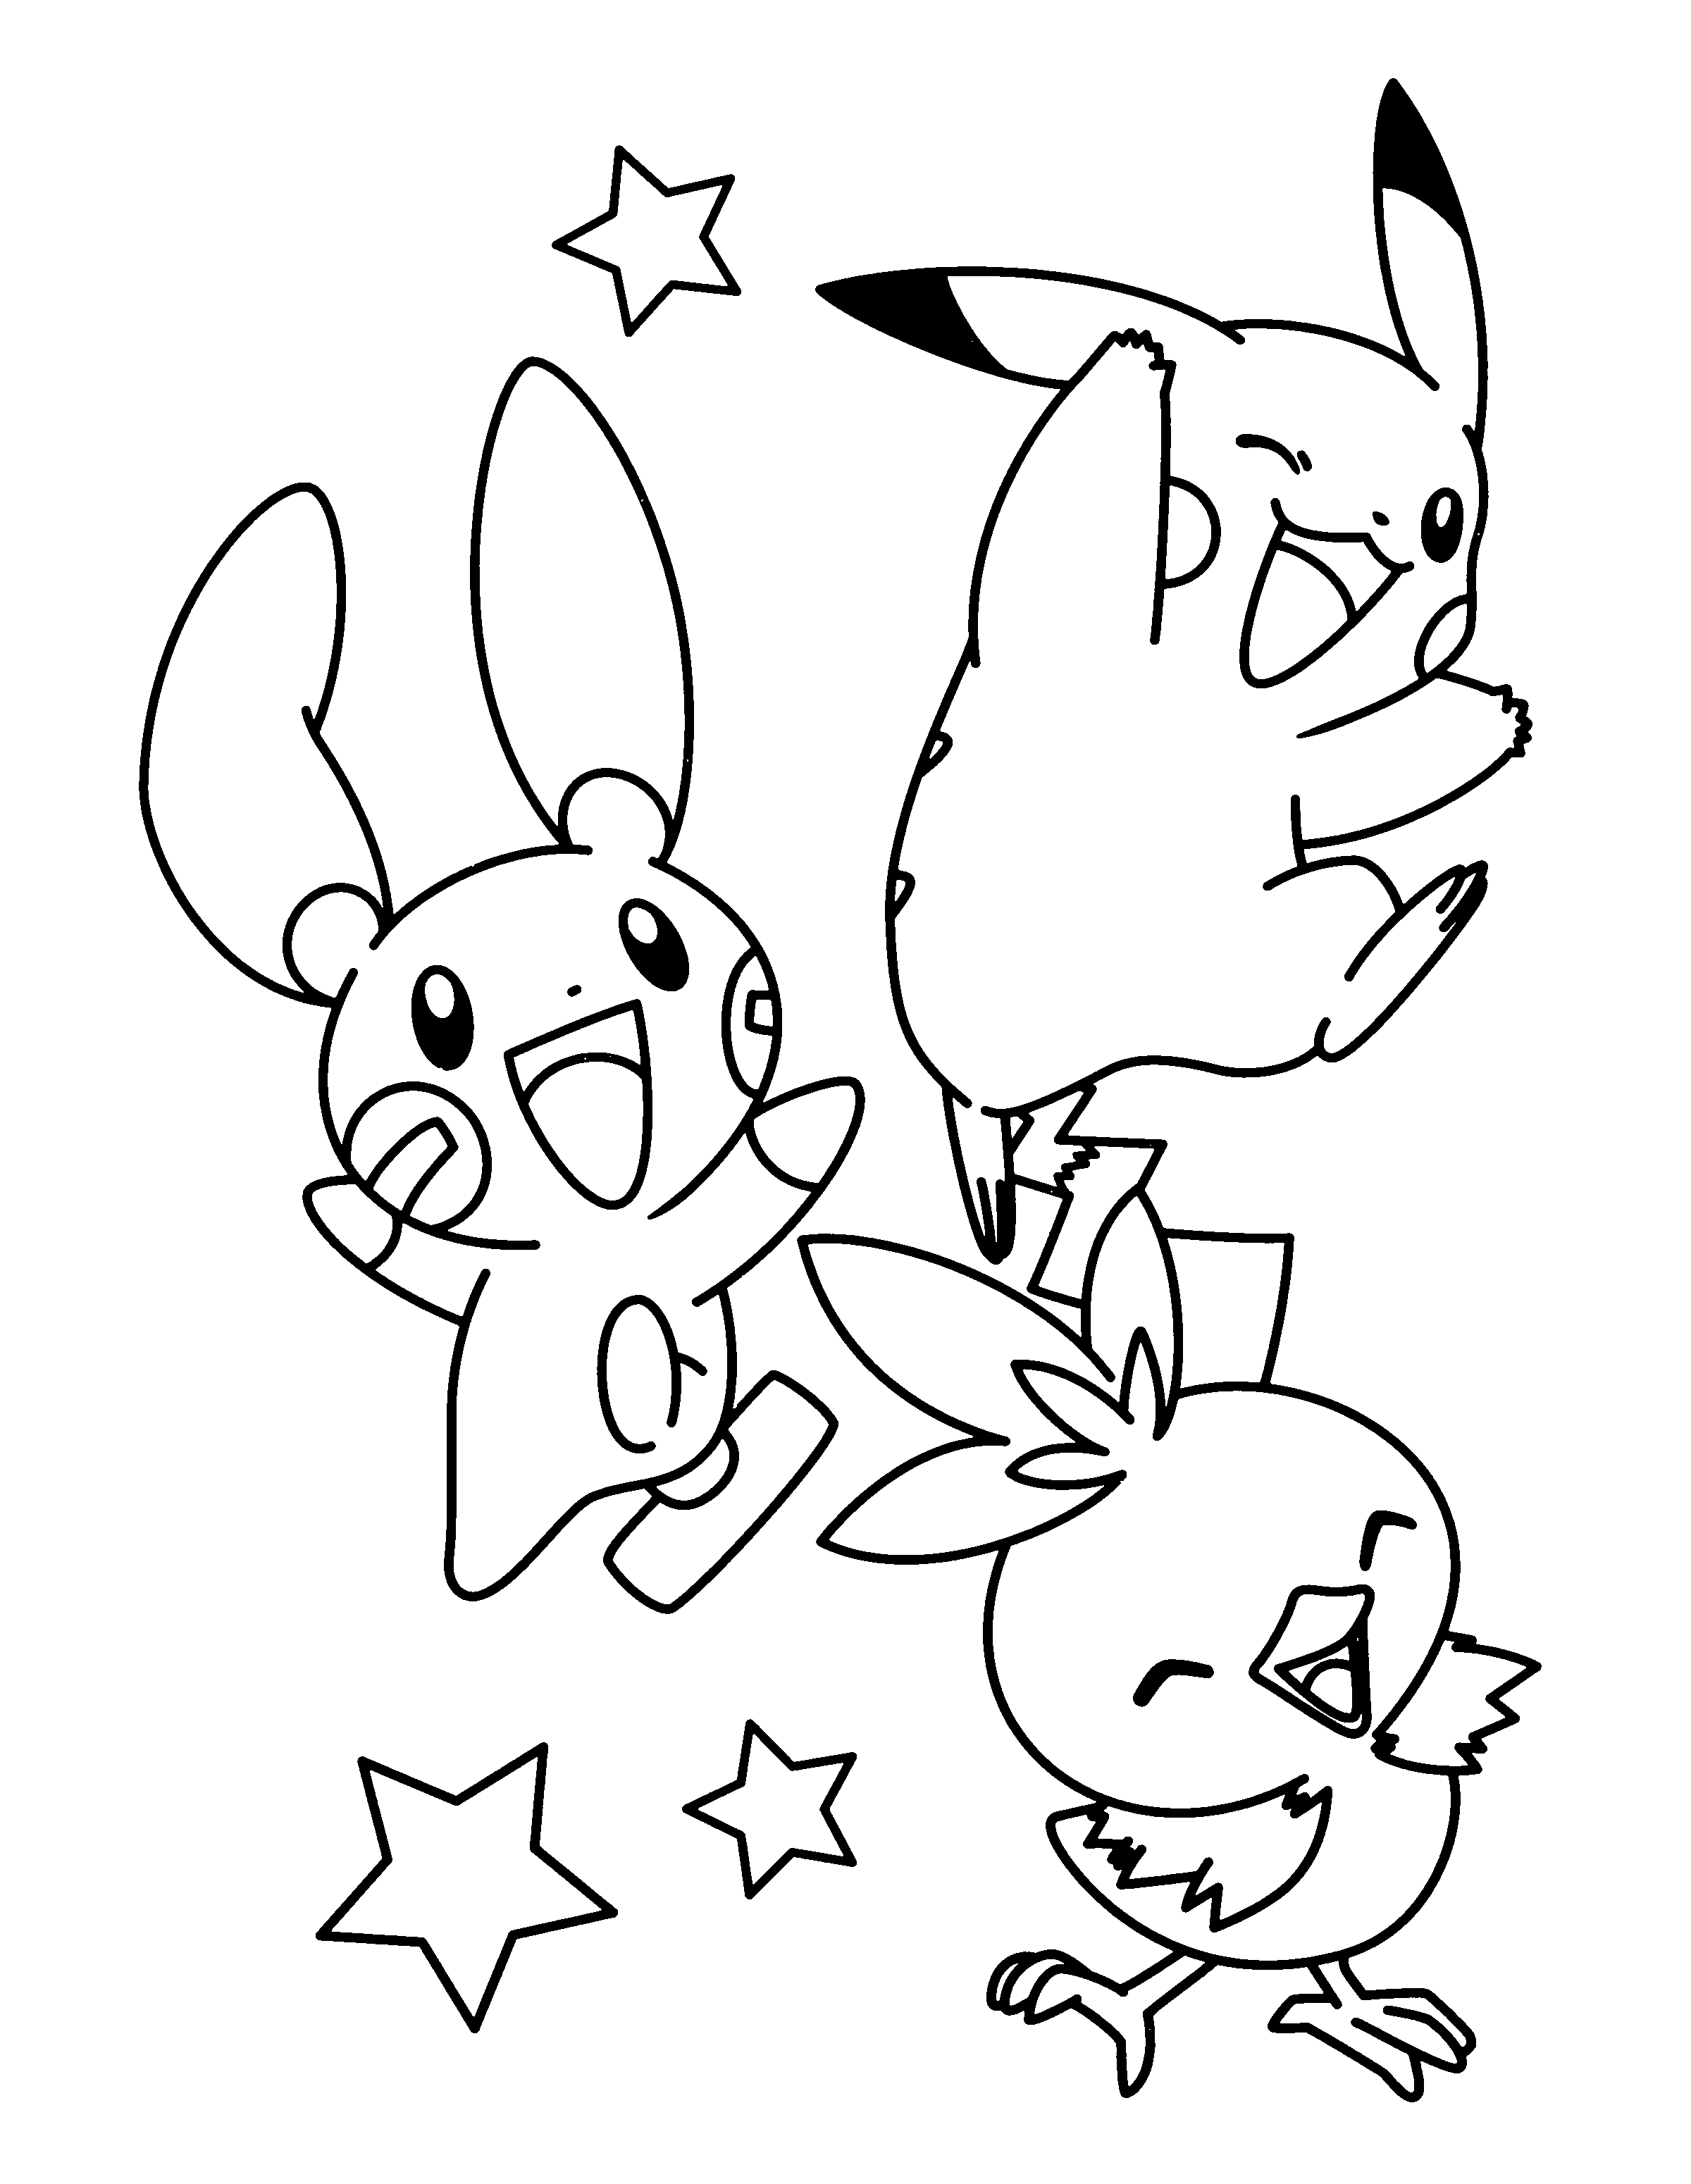 animated-coloring-pages-pokemon-image-1042